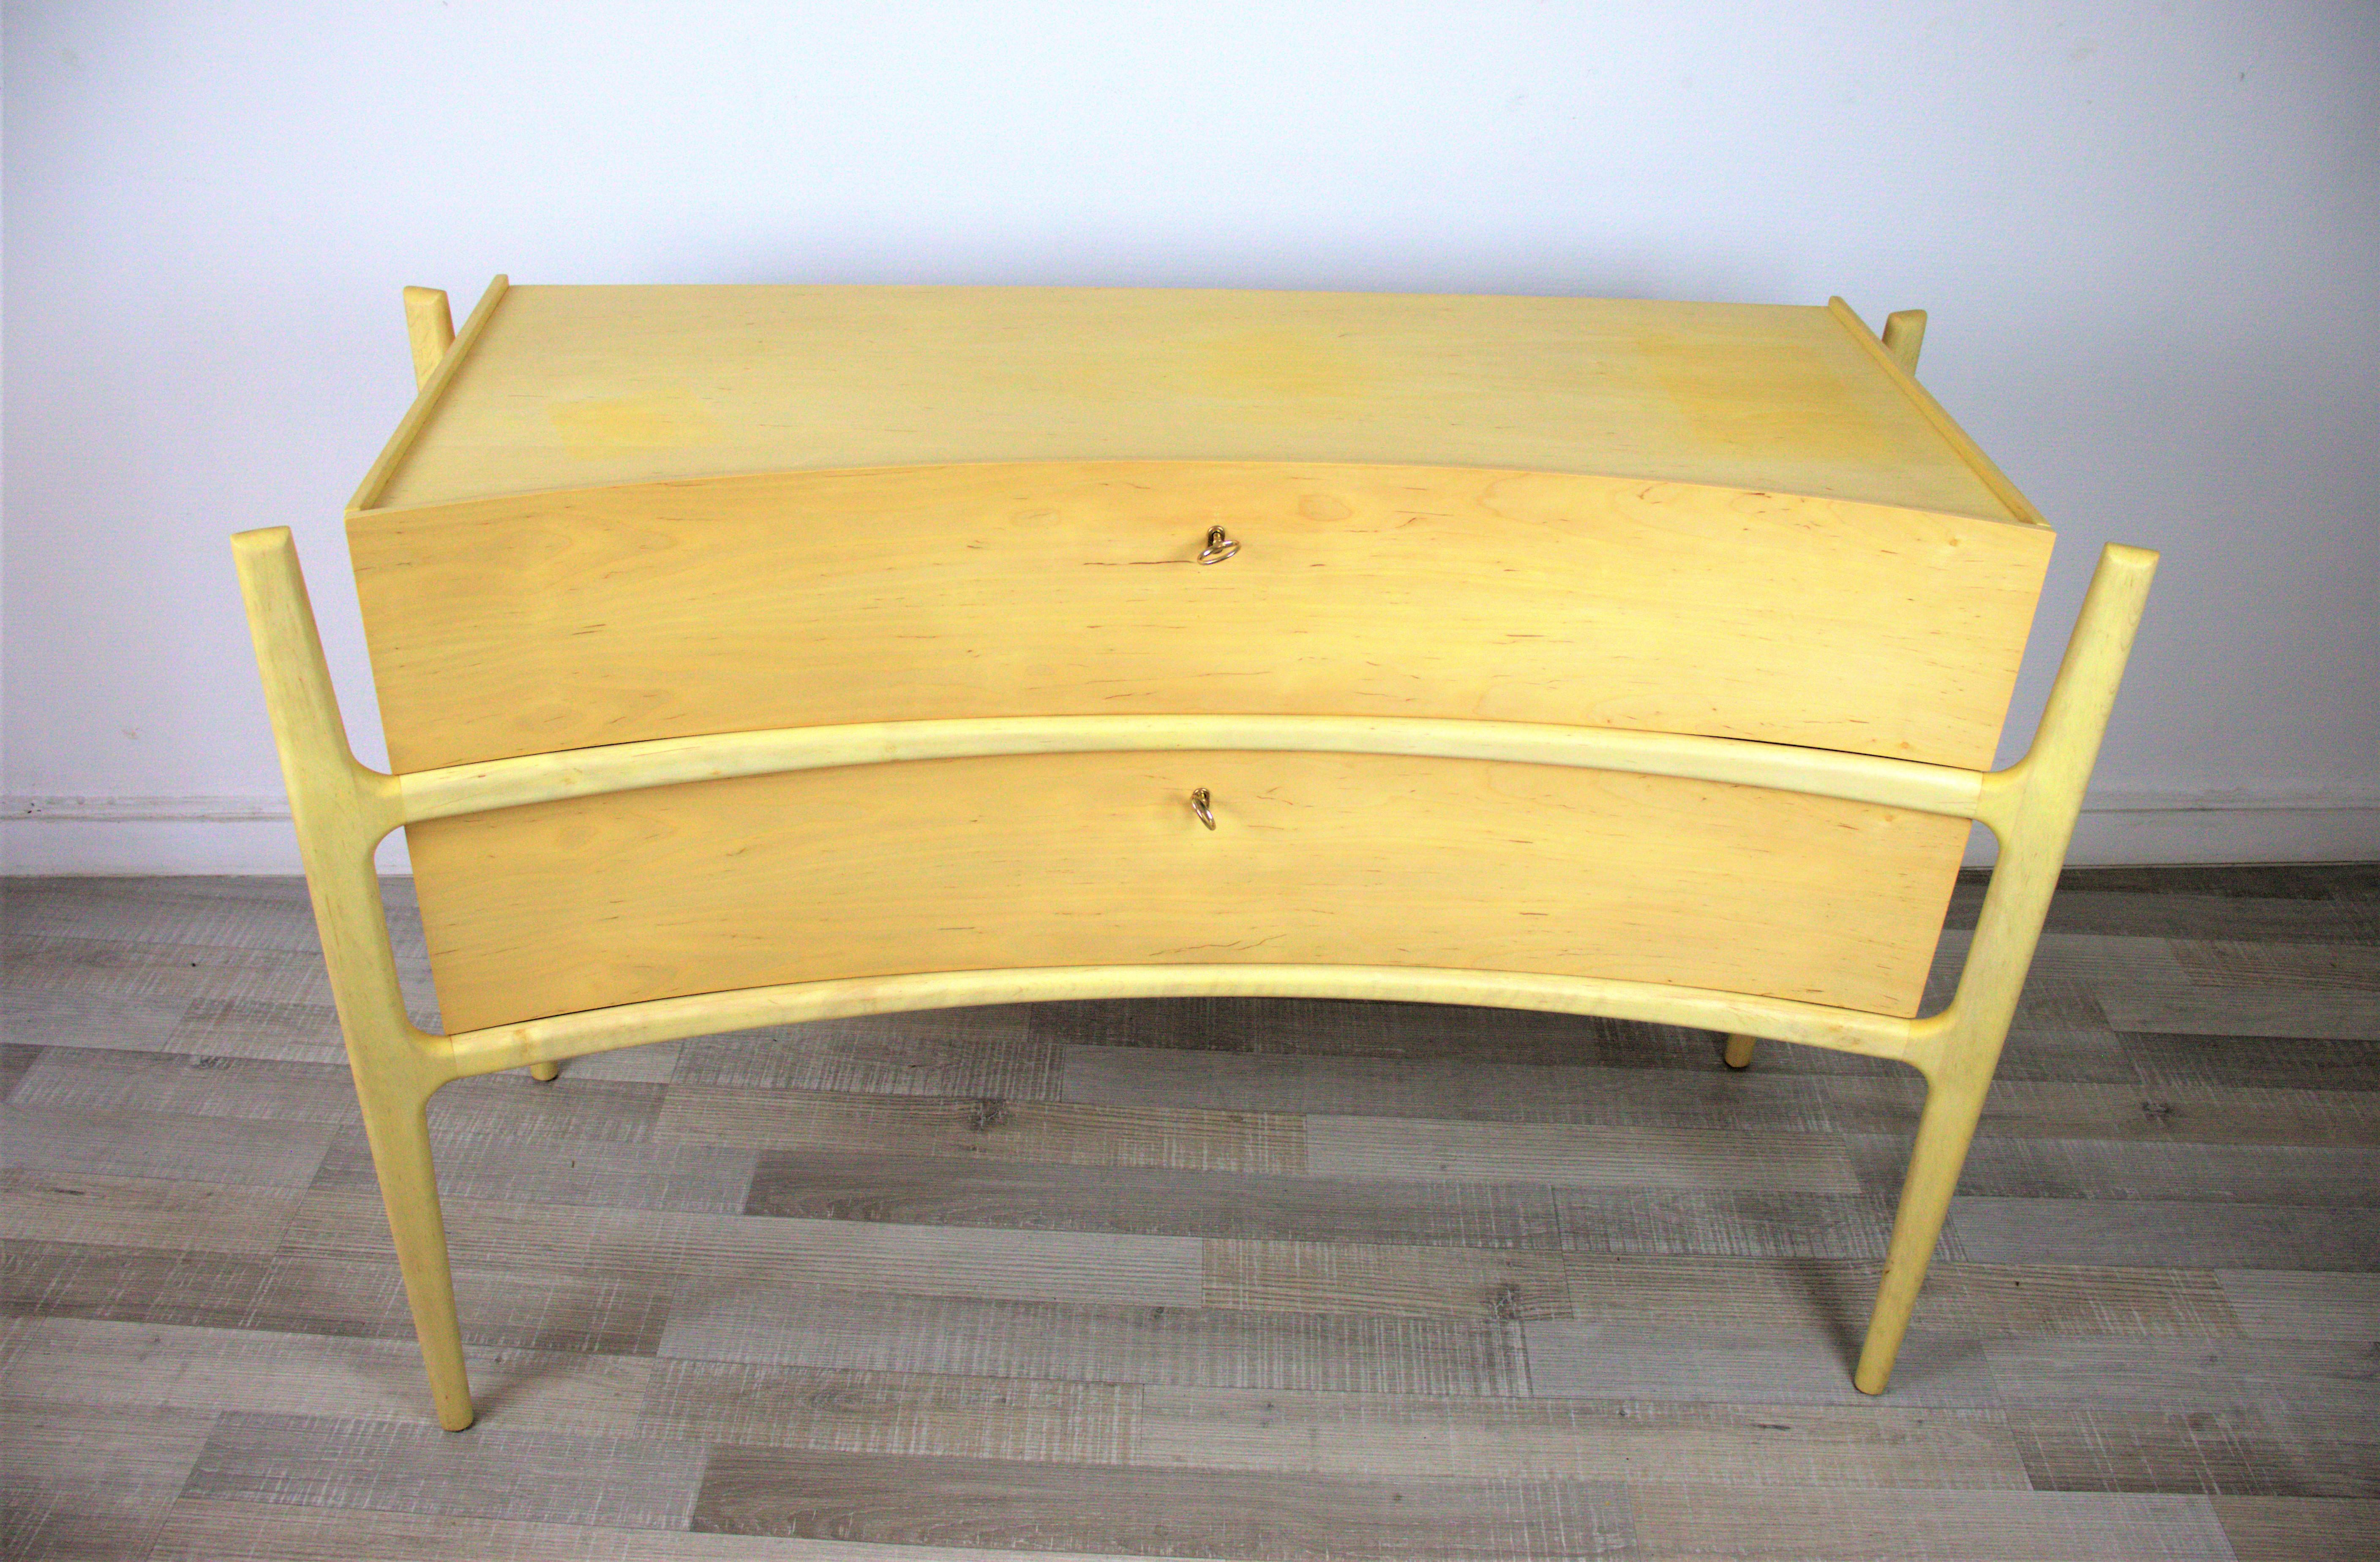 Scandinavian modern design commode, from 1980-1990s in an excellent condition.